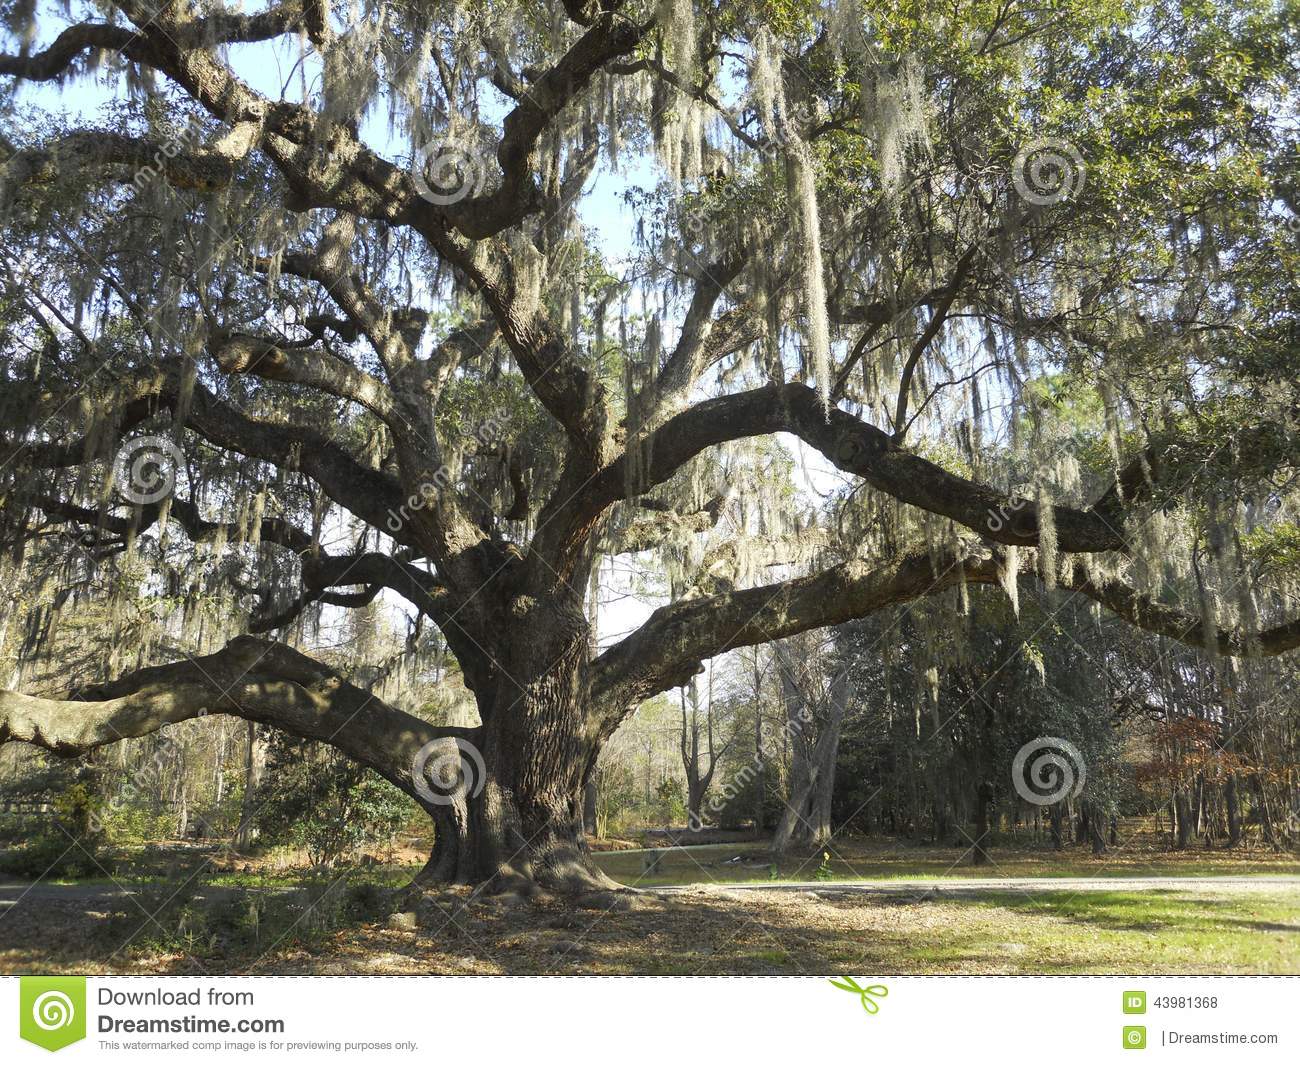 Huge Tree In South Carolina Spanish Moss Hanging From Its Branches